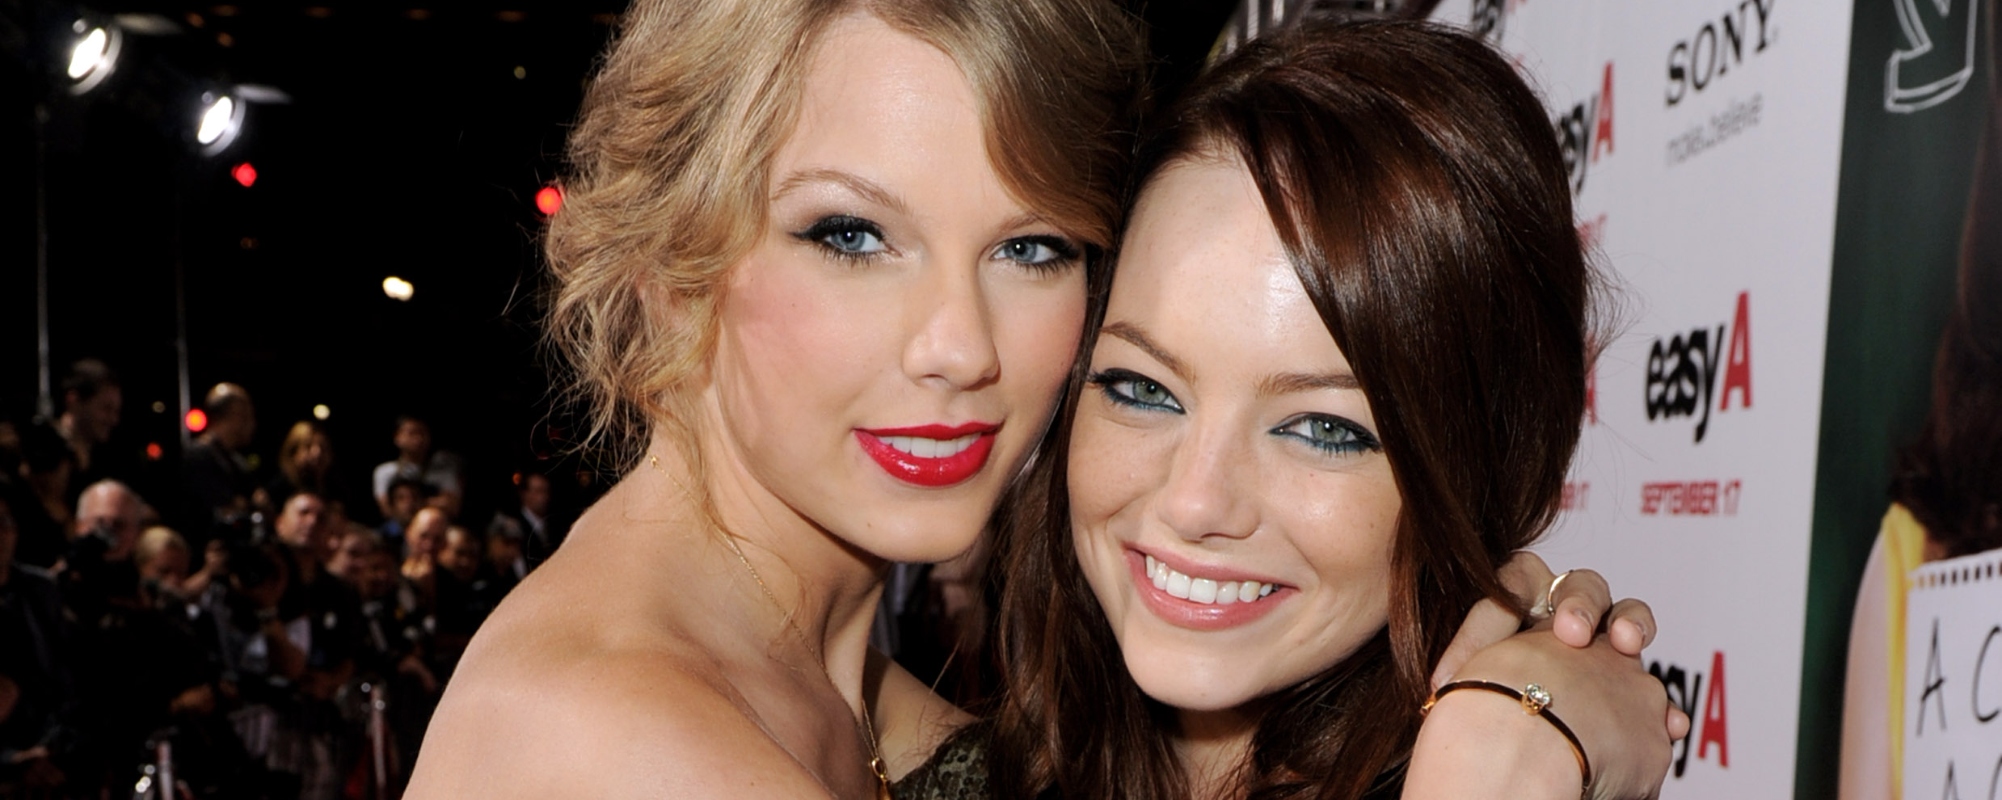 Emma Stone Claims She’ll Never Make a Joke About Friend Taylor Swift After Comments Were Taken Out of Context